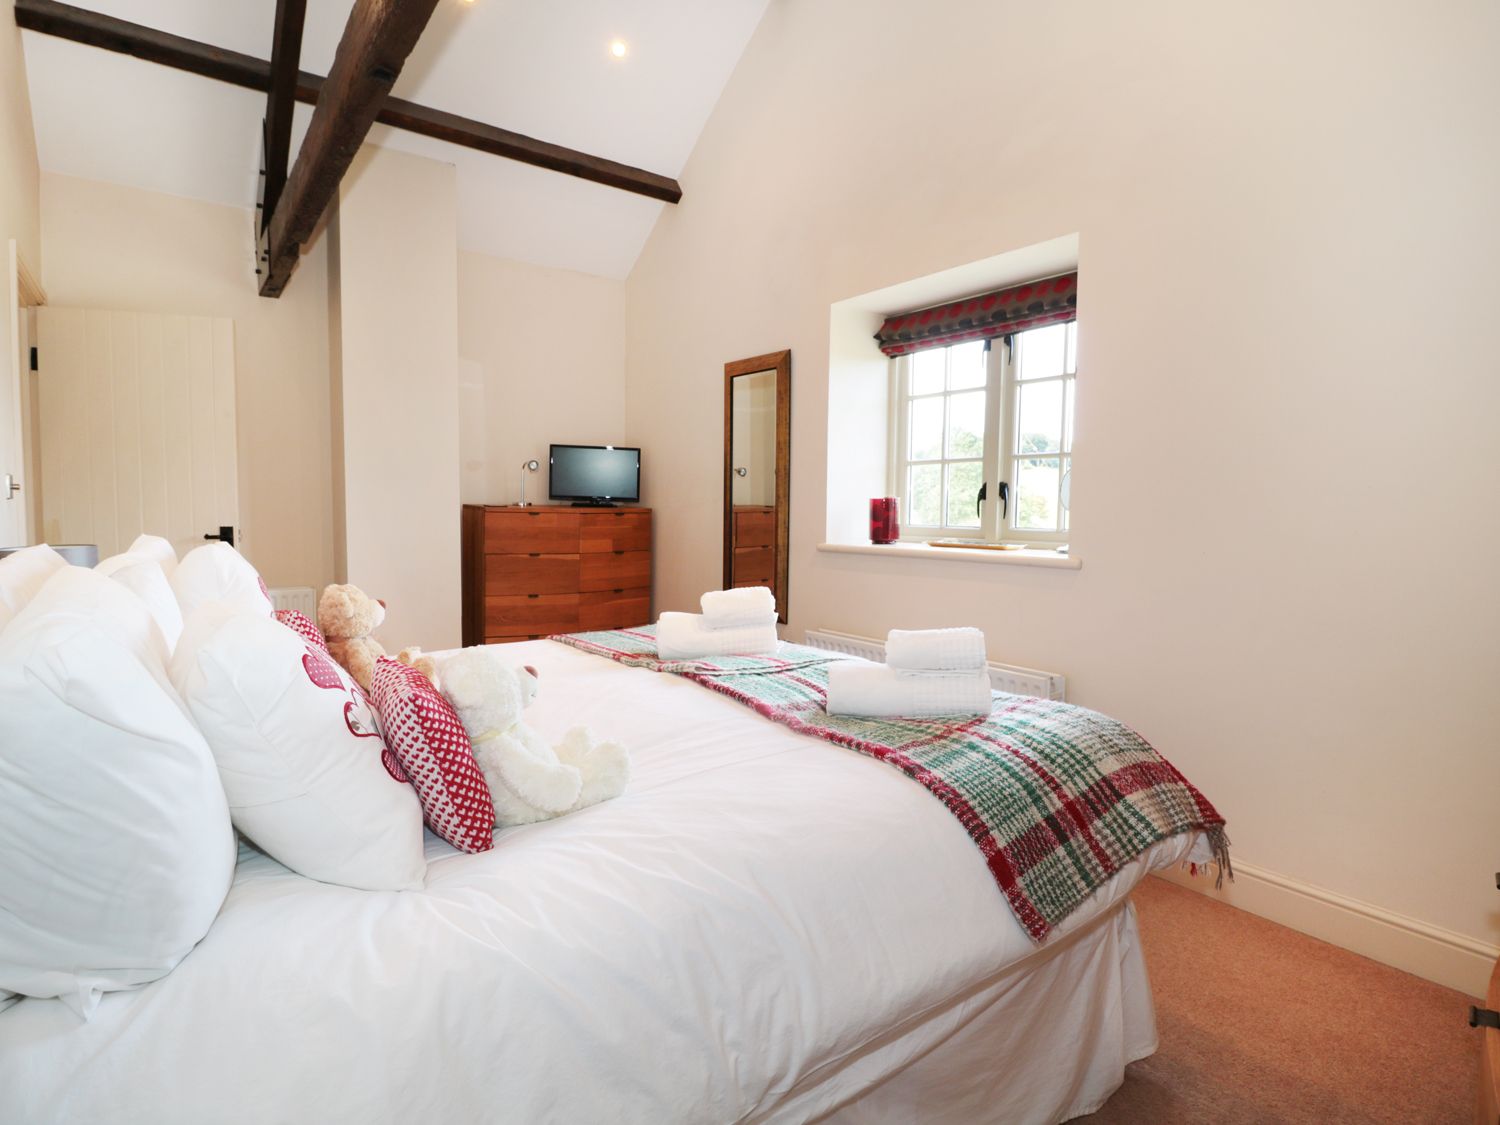 Watermill Cottage, Northumberland